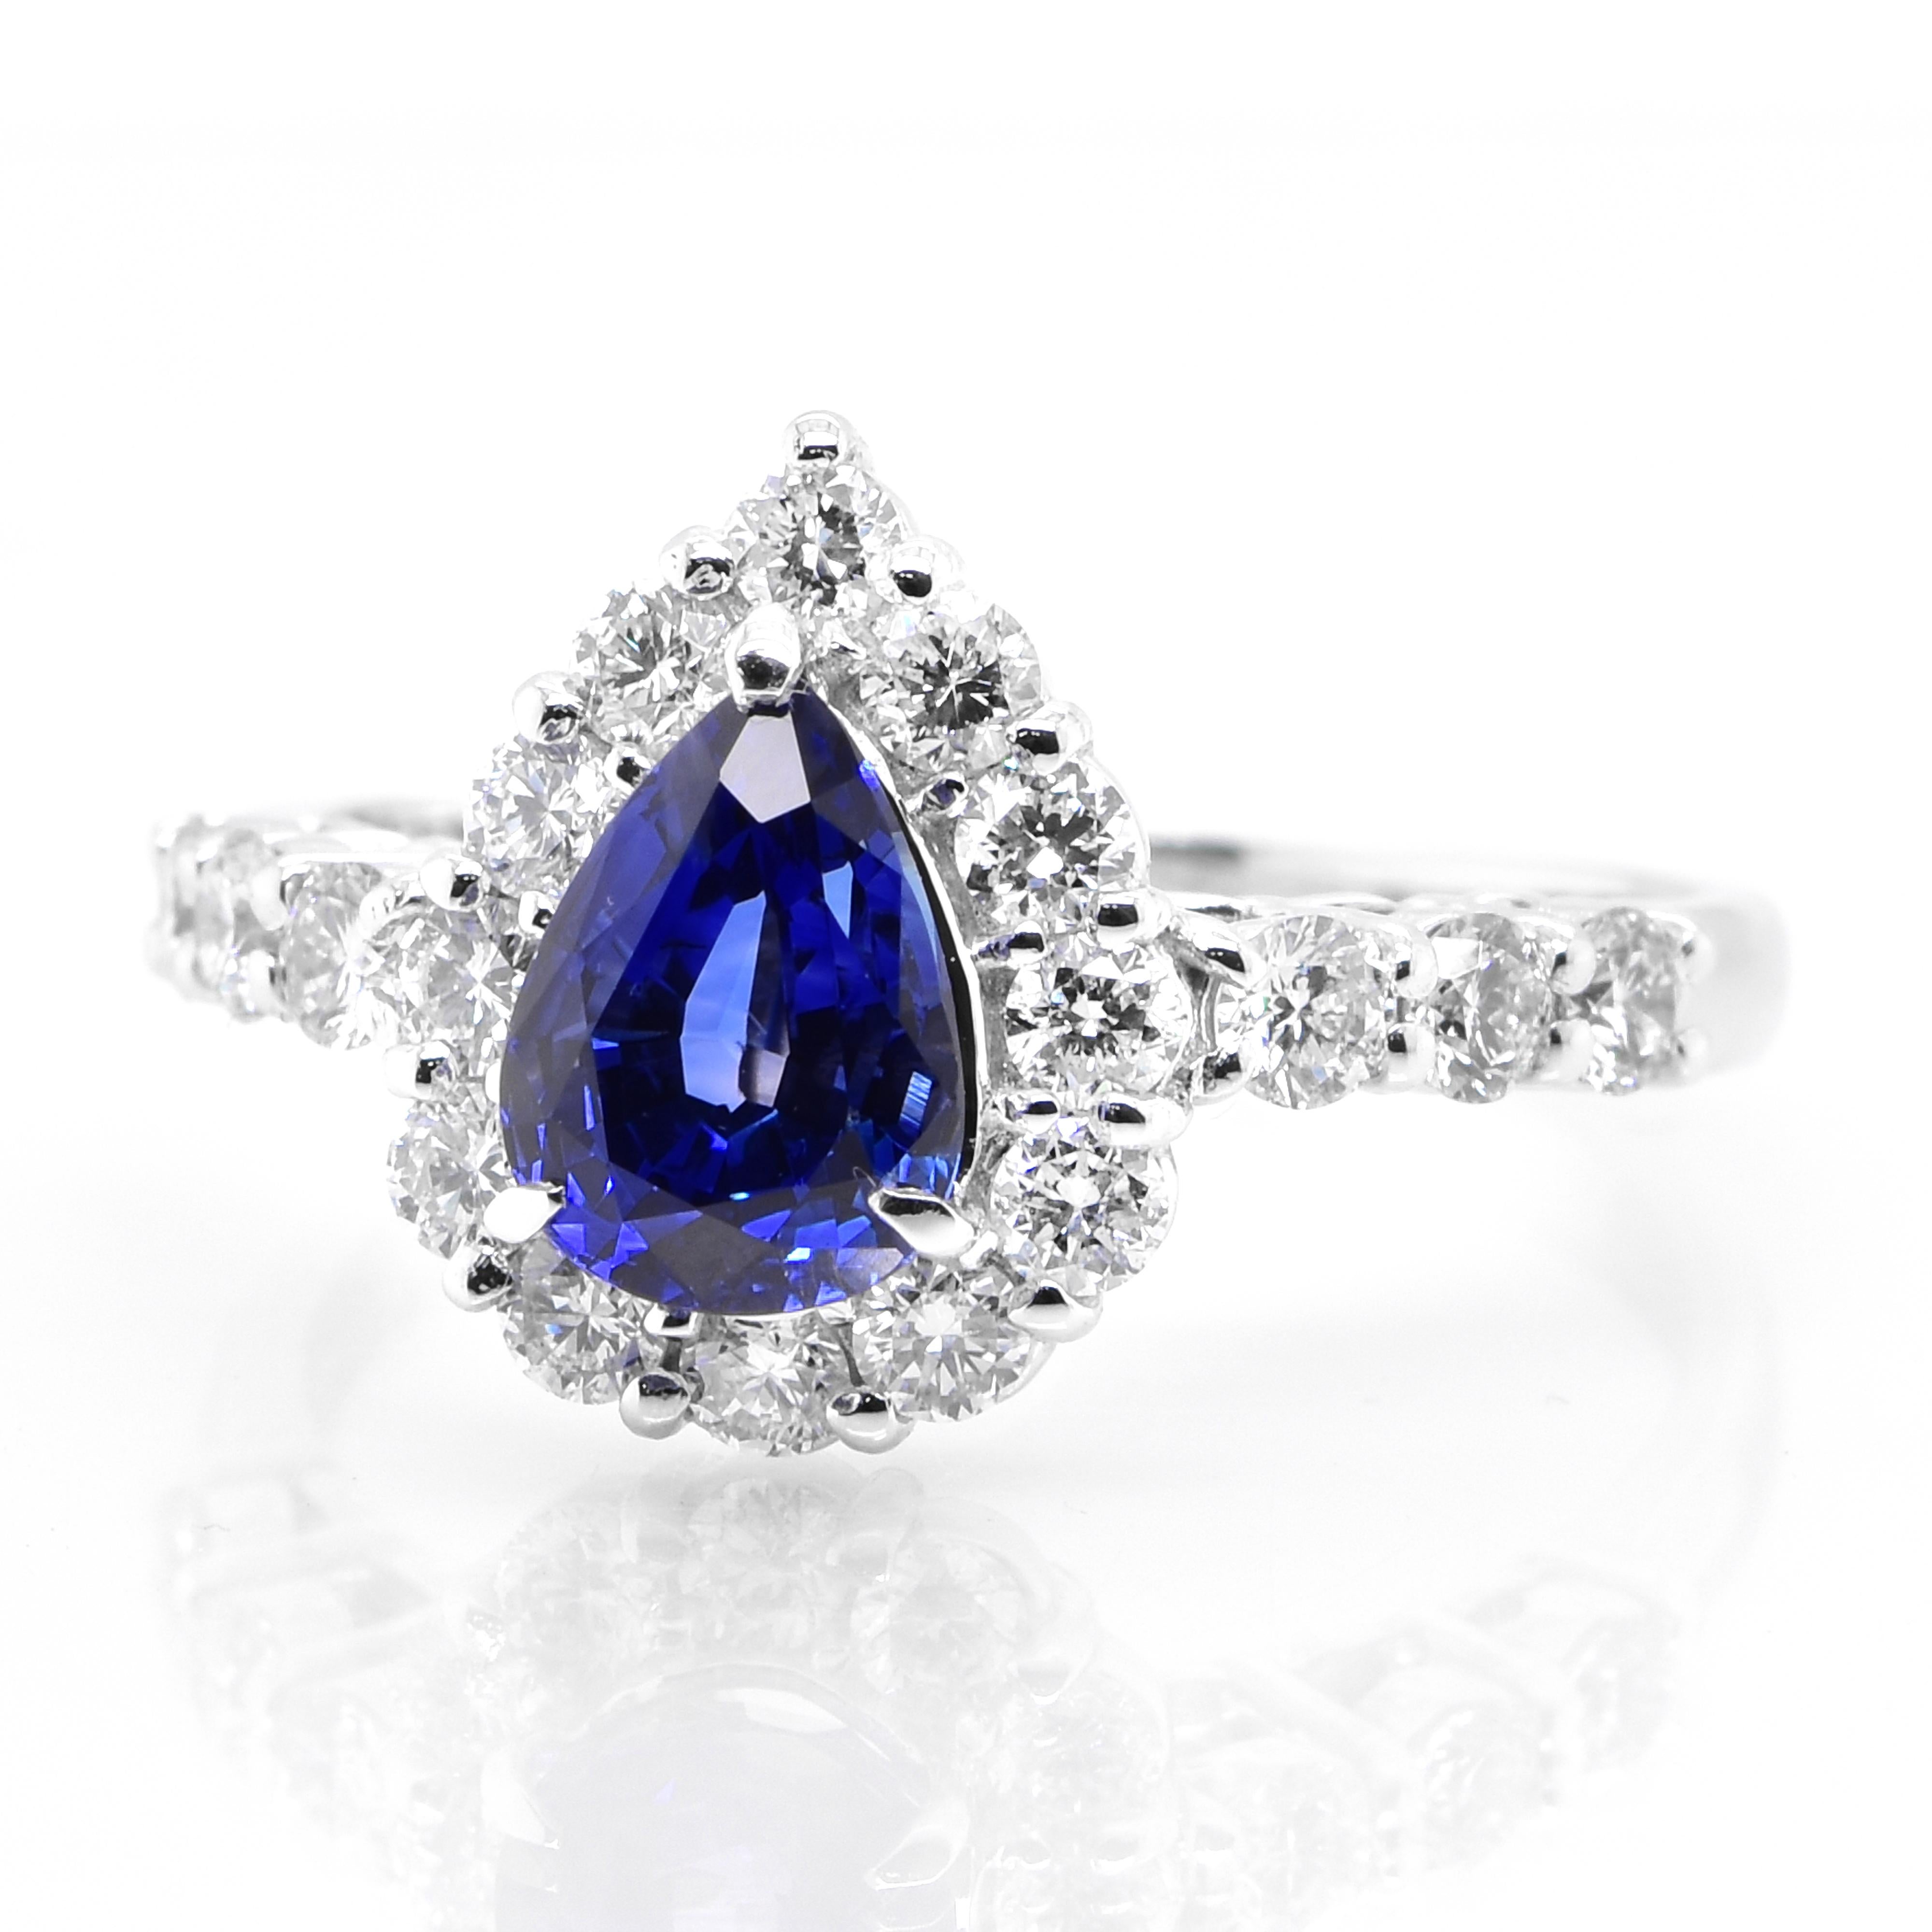 A beautiful ring featuring AIGS Certified 1.50 Carat Natural Royal Blue Color Sapphire and 0.70 Carats Diamond Accents set in Platinum. Sapphires have extraordinary durability - they excel in hardness as well as toughness and durability making them